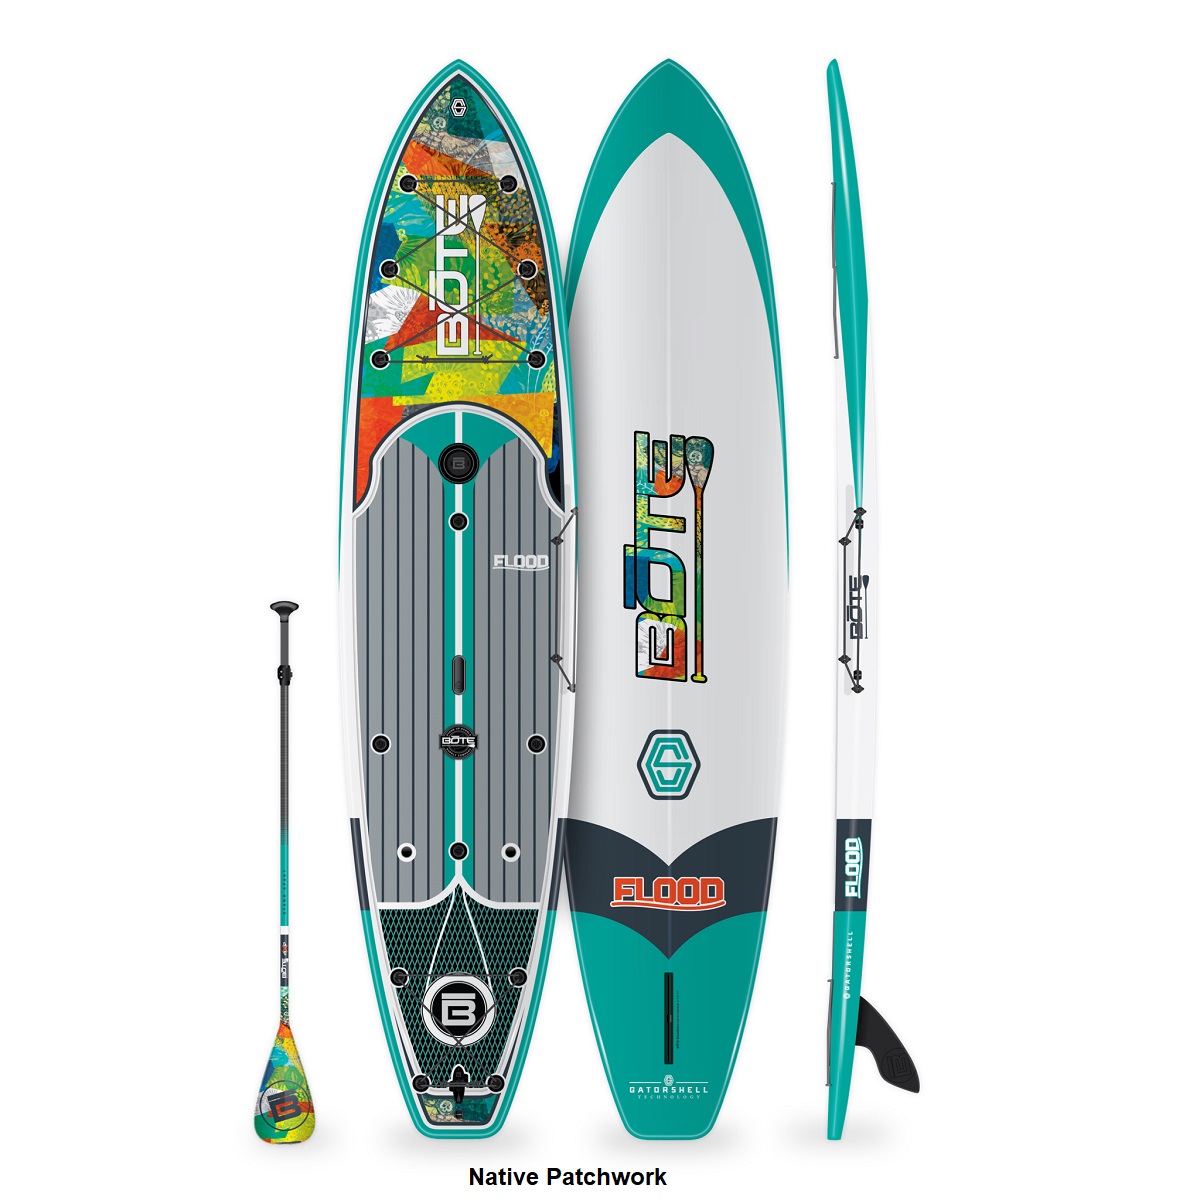 BOTE Flood 12' Paddle Board - Native Patchwork 2021